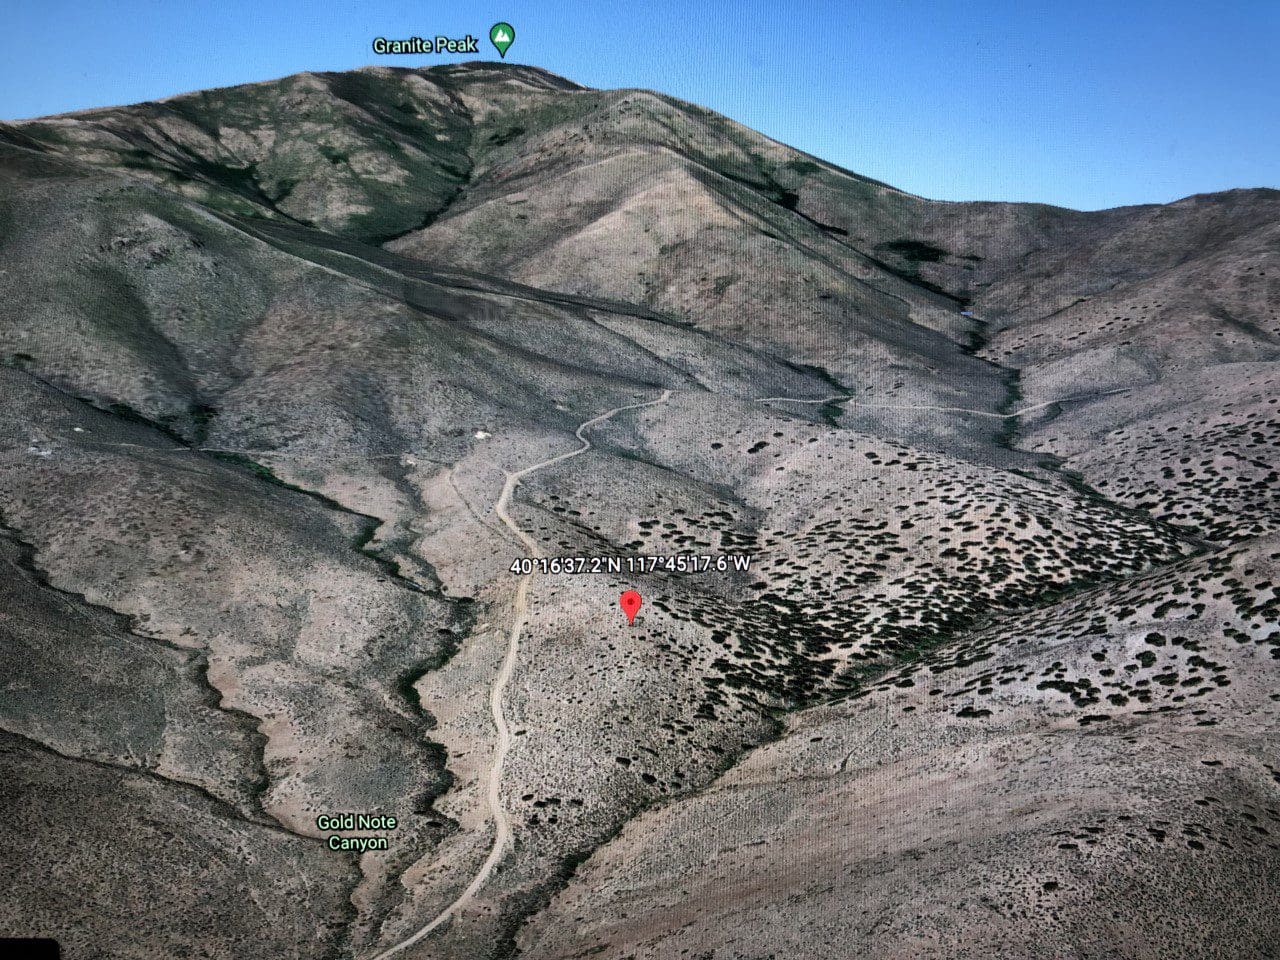 15.84 Acres in GOLD NOTE CANYON, HIDDEN TREASURE #1, SUR 2097 – A PATENTED MINING CLAIM -PAST PRODUCER OF GOLD, SILVER & ZINC photo 28